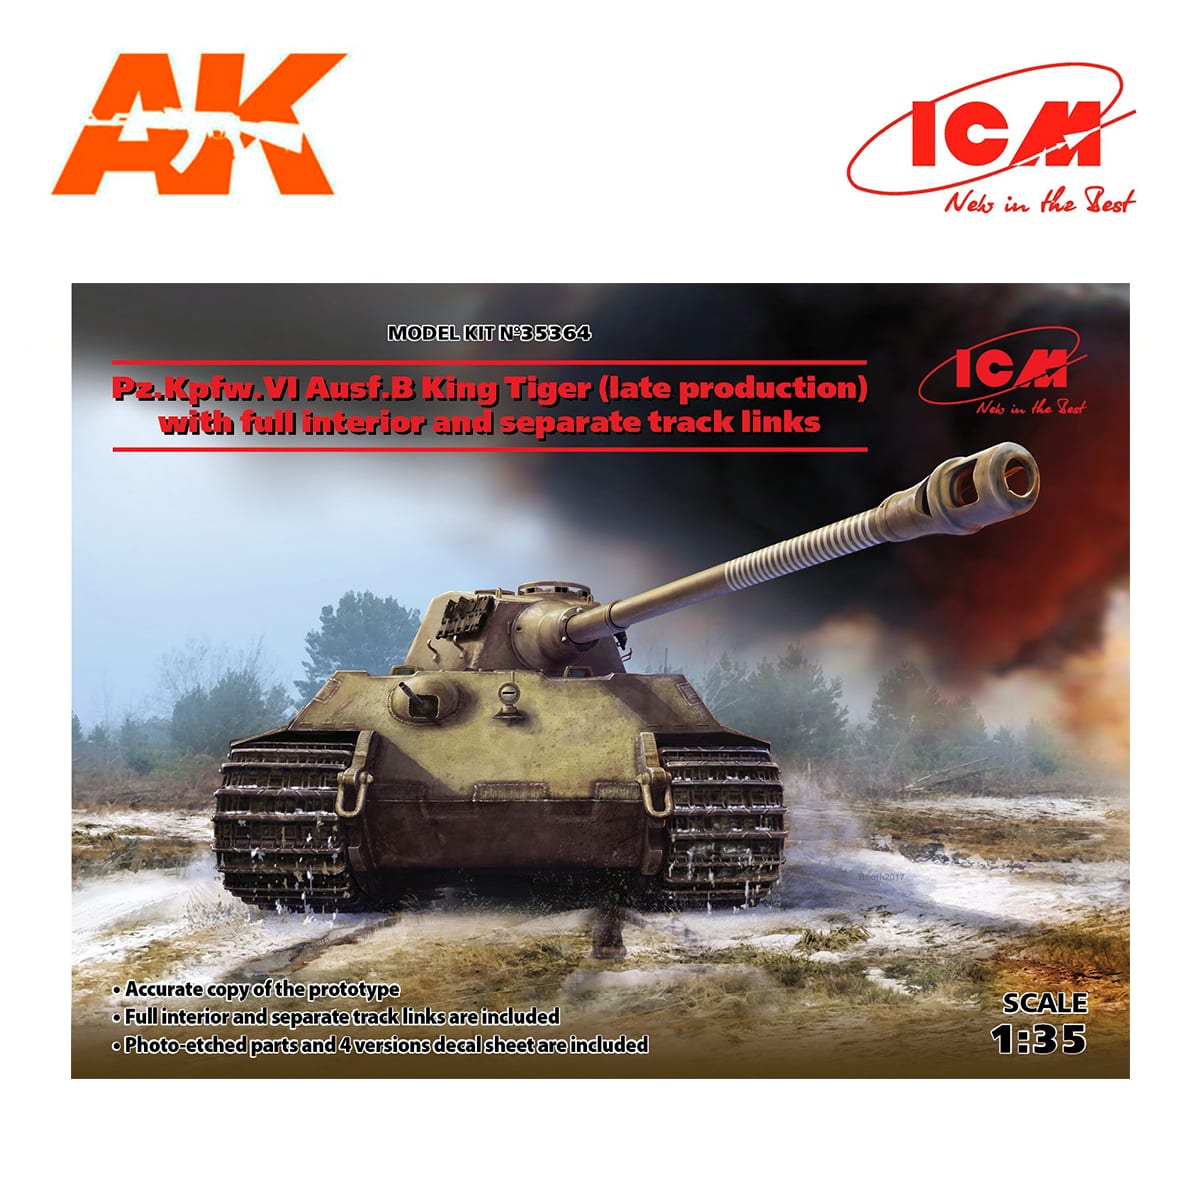 Buy Pz.Kpfw.VI Ausf.B King Tiger (late production) with full 